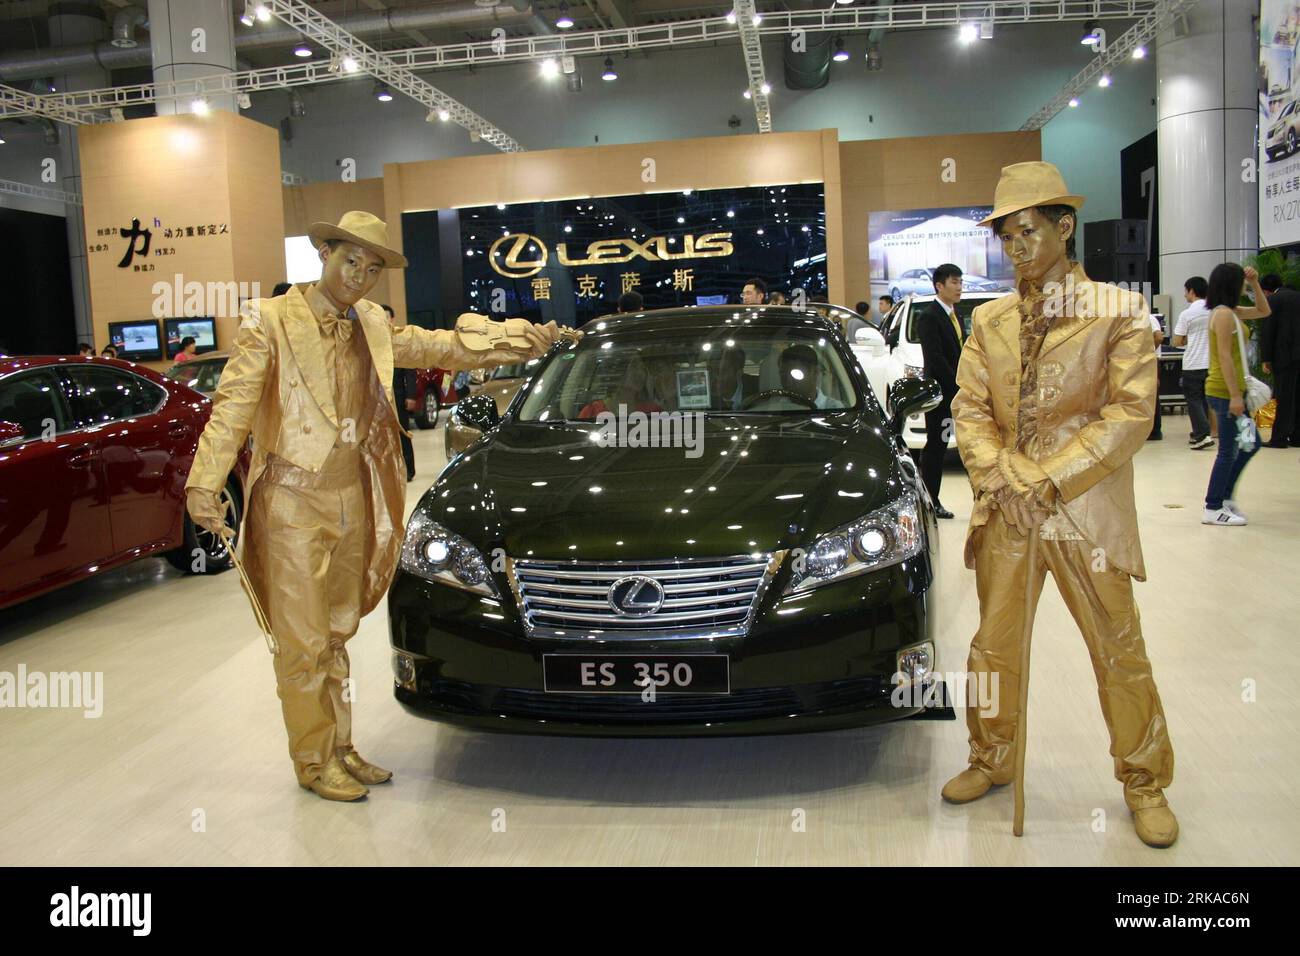 Bildnummer: 54311487  Datum: 18.08.2010  Copyright: imago/Xinhua (100818) -- DALIAN, Aug. 18, 2010 (Xinhua) -- Car models present a Lexus ES 350 during the 2010 Dalian International Automotive Exhibiton in Dalian, northeast China s Liaoning Province, Aug. 18, 2010. More than 1,100 cars from 12 countries and regions were displayed on the exhibiton, which was kicked off on Wednesday. (Xinhua/Yan Ping)  CHINA-LIAONING-DALIAN-AUTOMOTIVE EXPO (CN) PUBLICATIONxNOTxINxCHN Wirtschaft Messen Automesse Auto kbdig xdp 2010 quer o0 ES350    Bildnummer 54311487 Date 18 08 2010 Copyright Imago XINHUA  Dalia Stock Photo